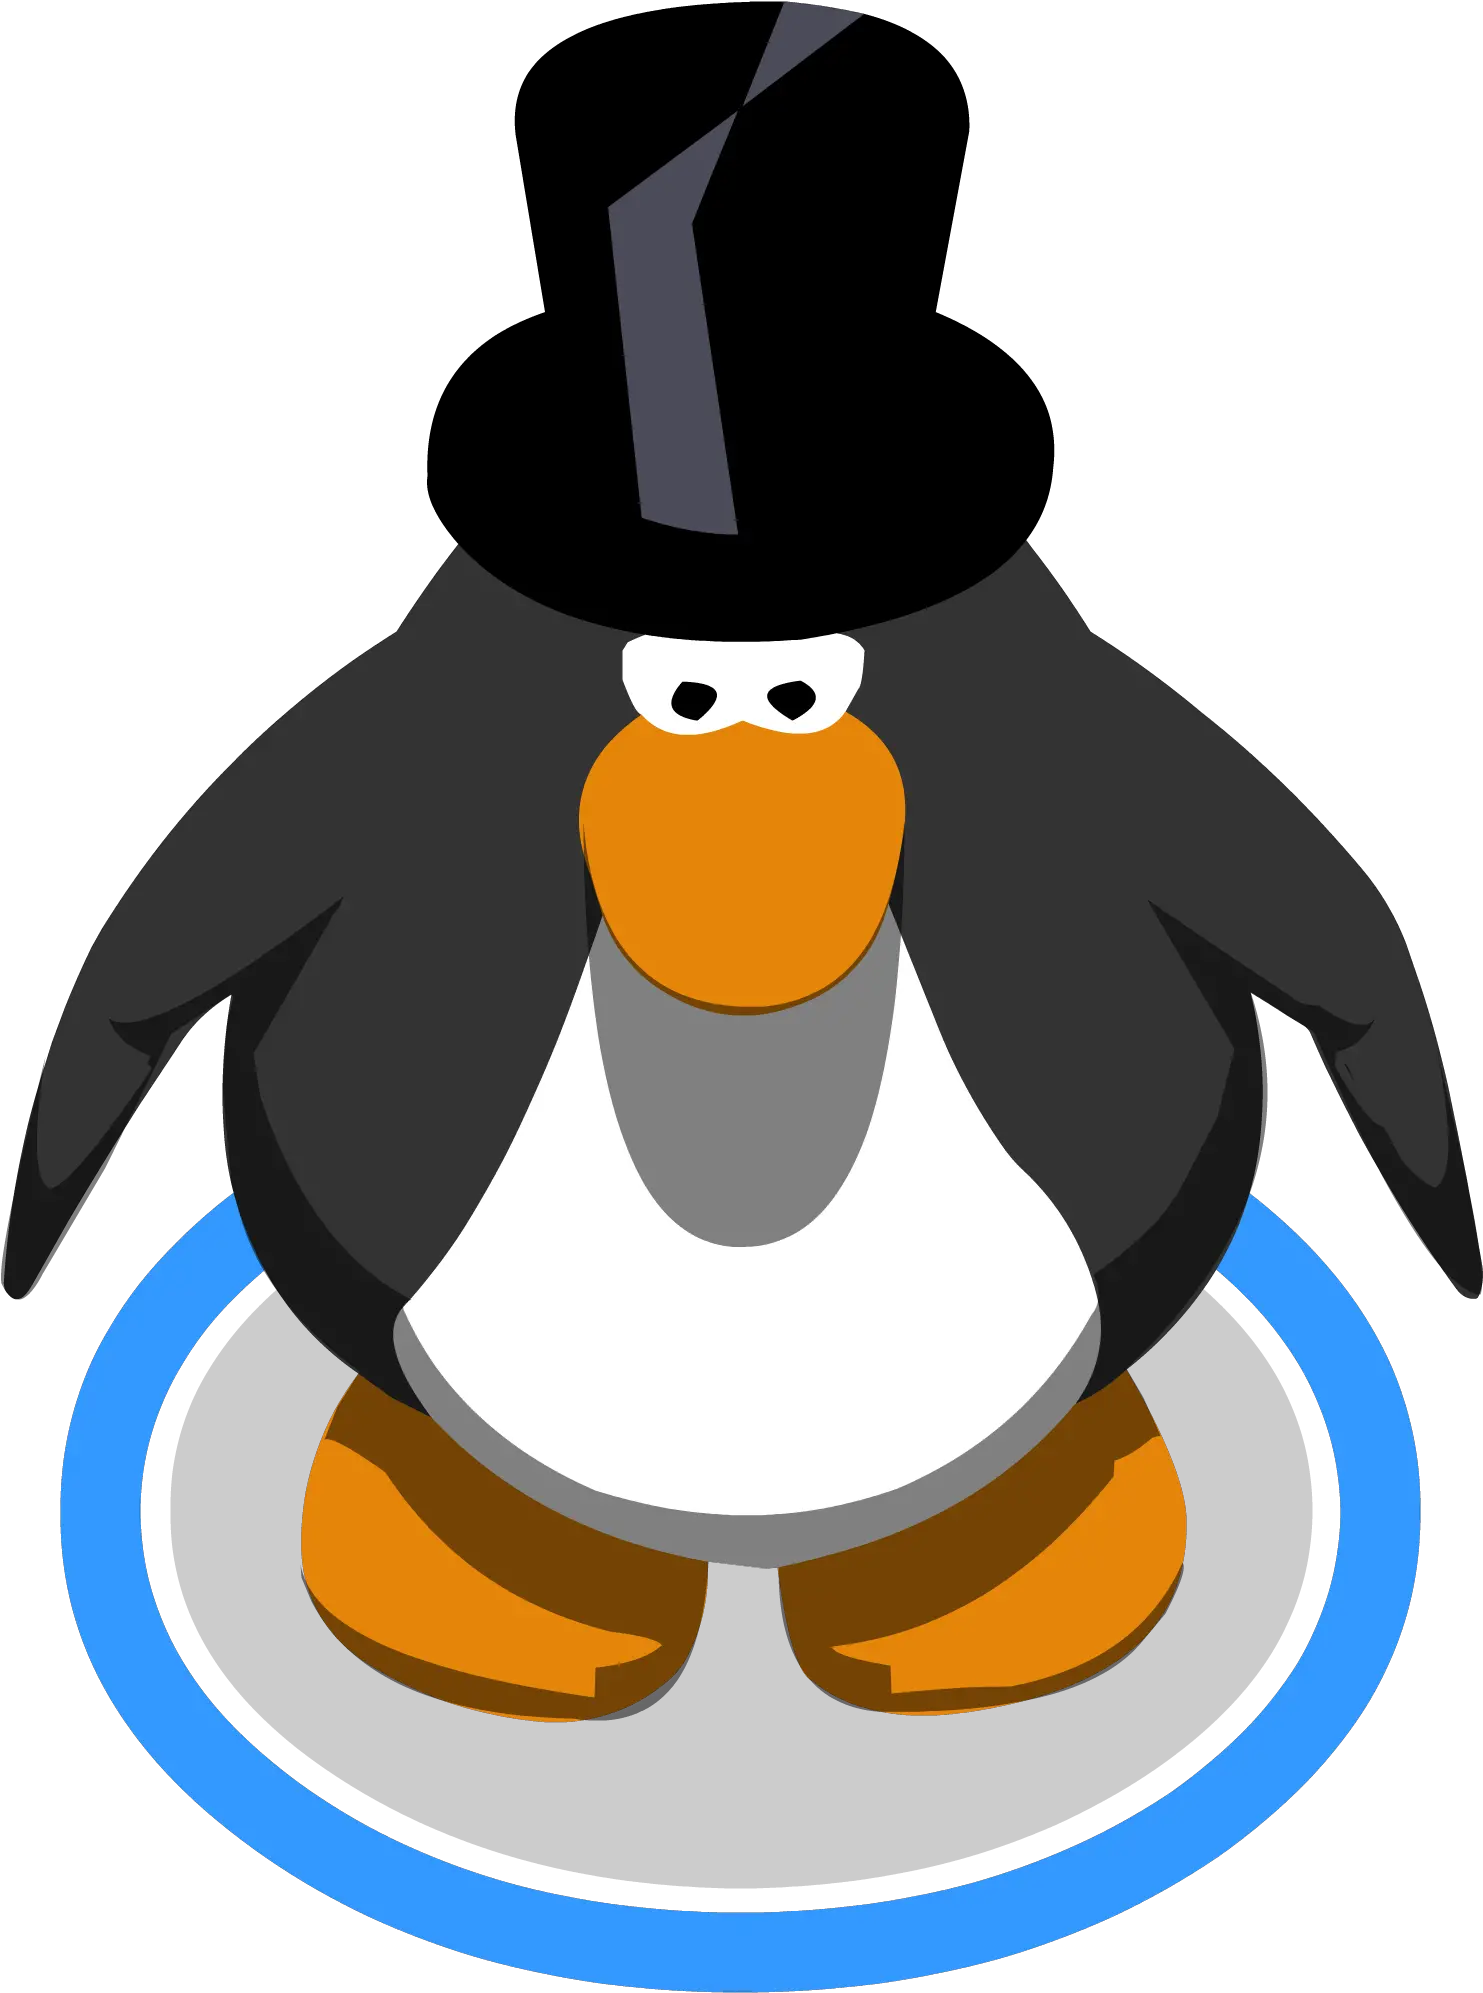 Download Top Hat Ingame Penguin With Top Hat Full Size Purple Club Penguin Penguins Png Tophat Png